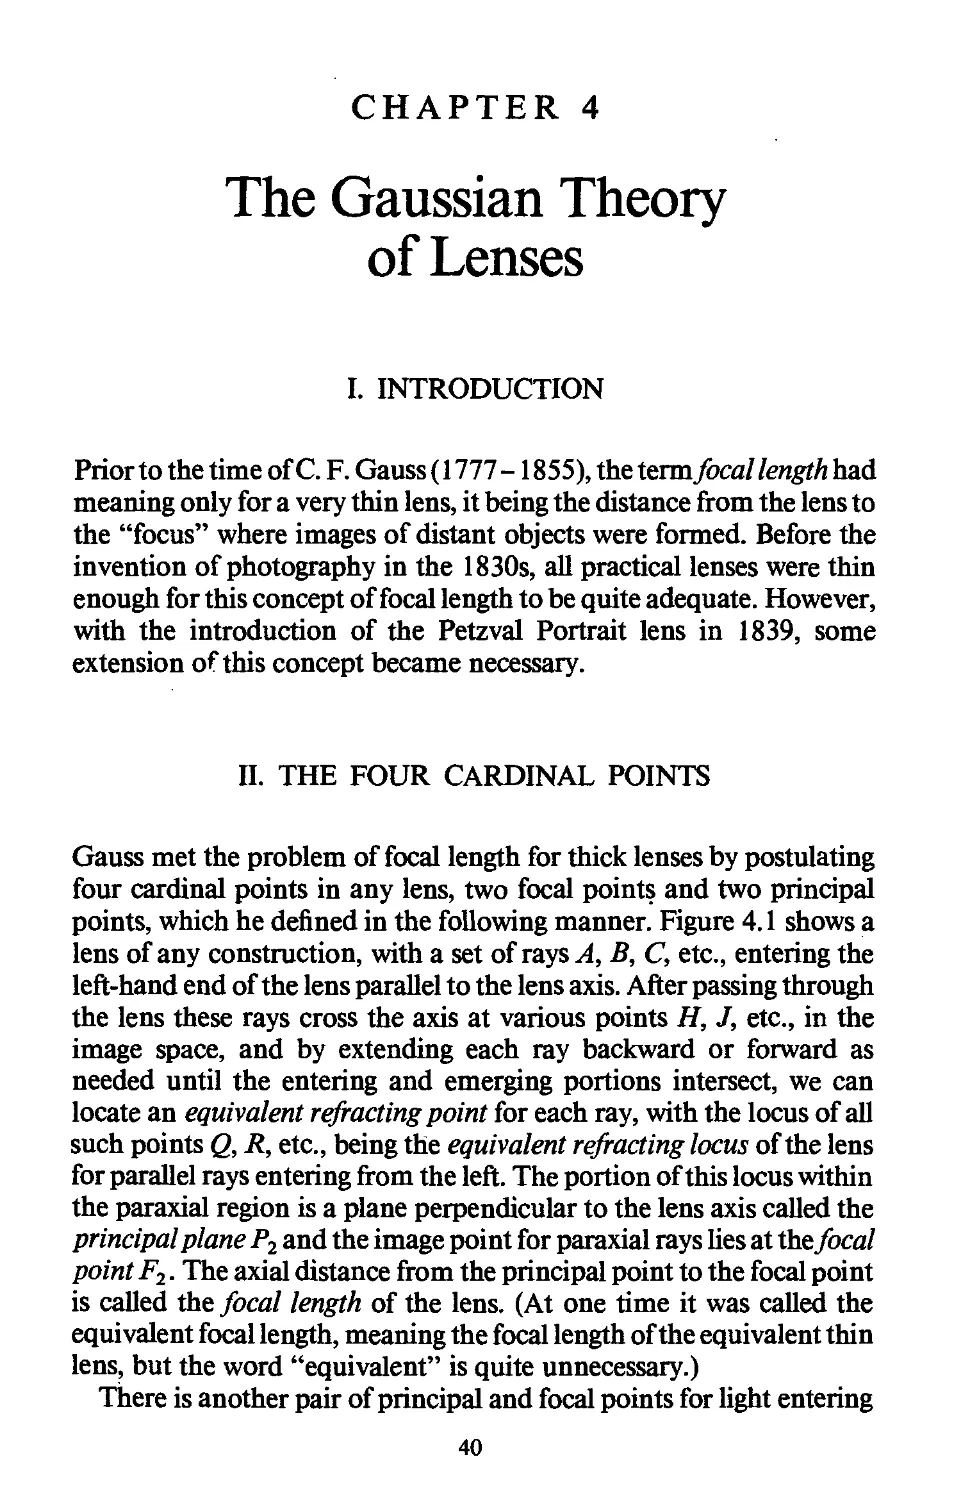 4. THE GAUSSIAN THEORY OF LENSES
II. The Four Cardinal Points